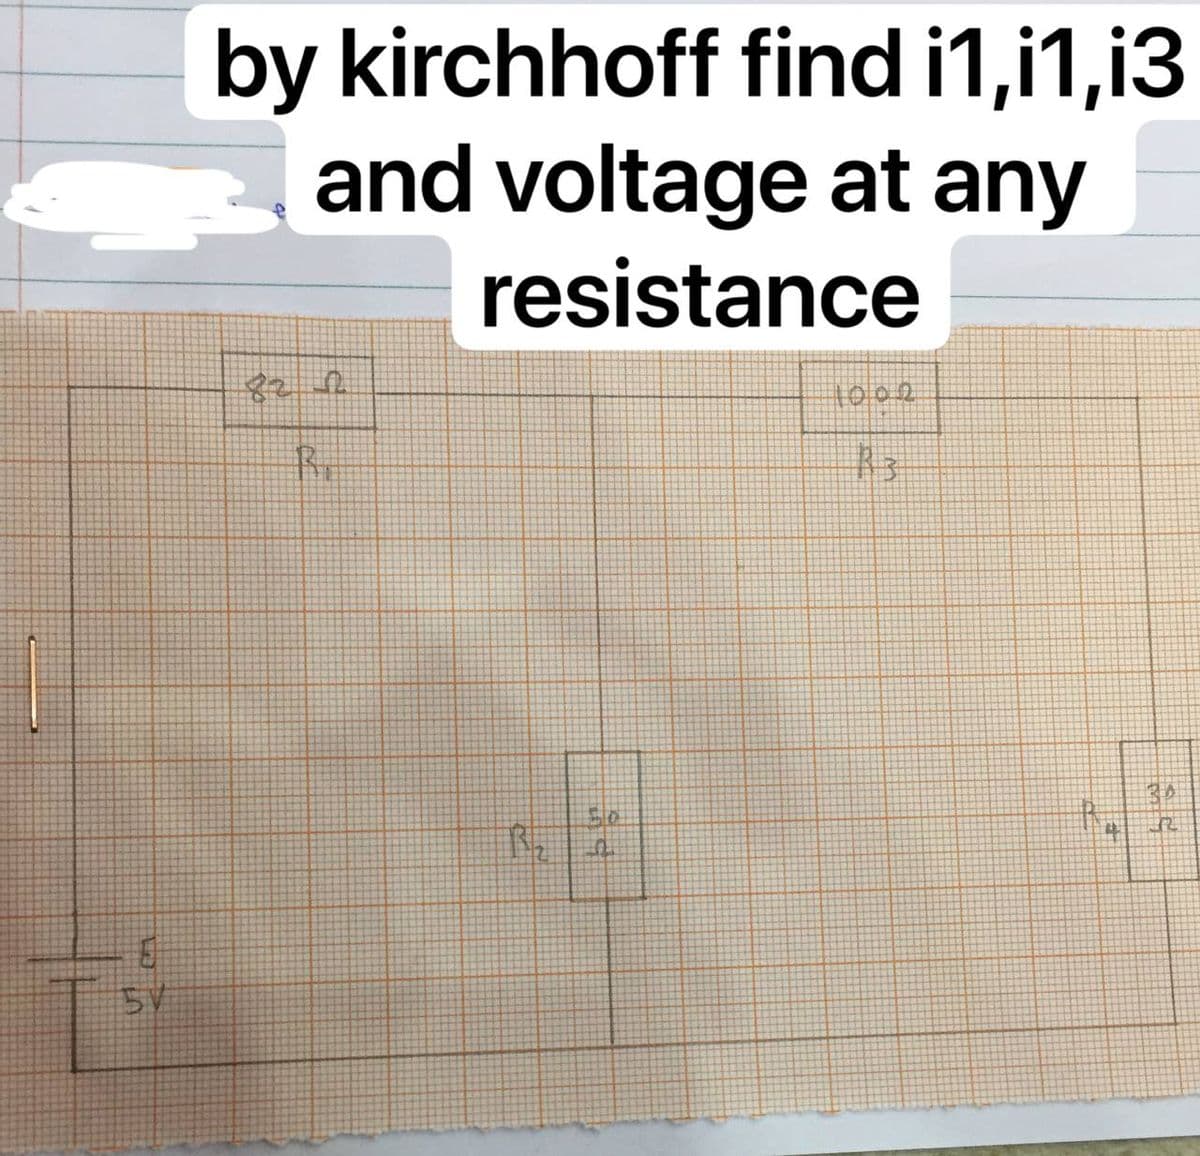 by kirchhoff find i1,i1,i3
and voltage at any
resistance
1002
5V
